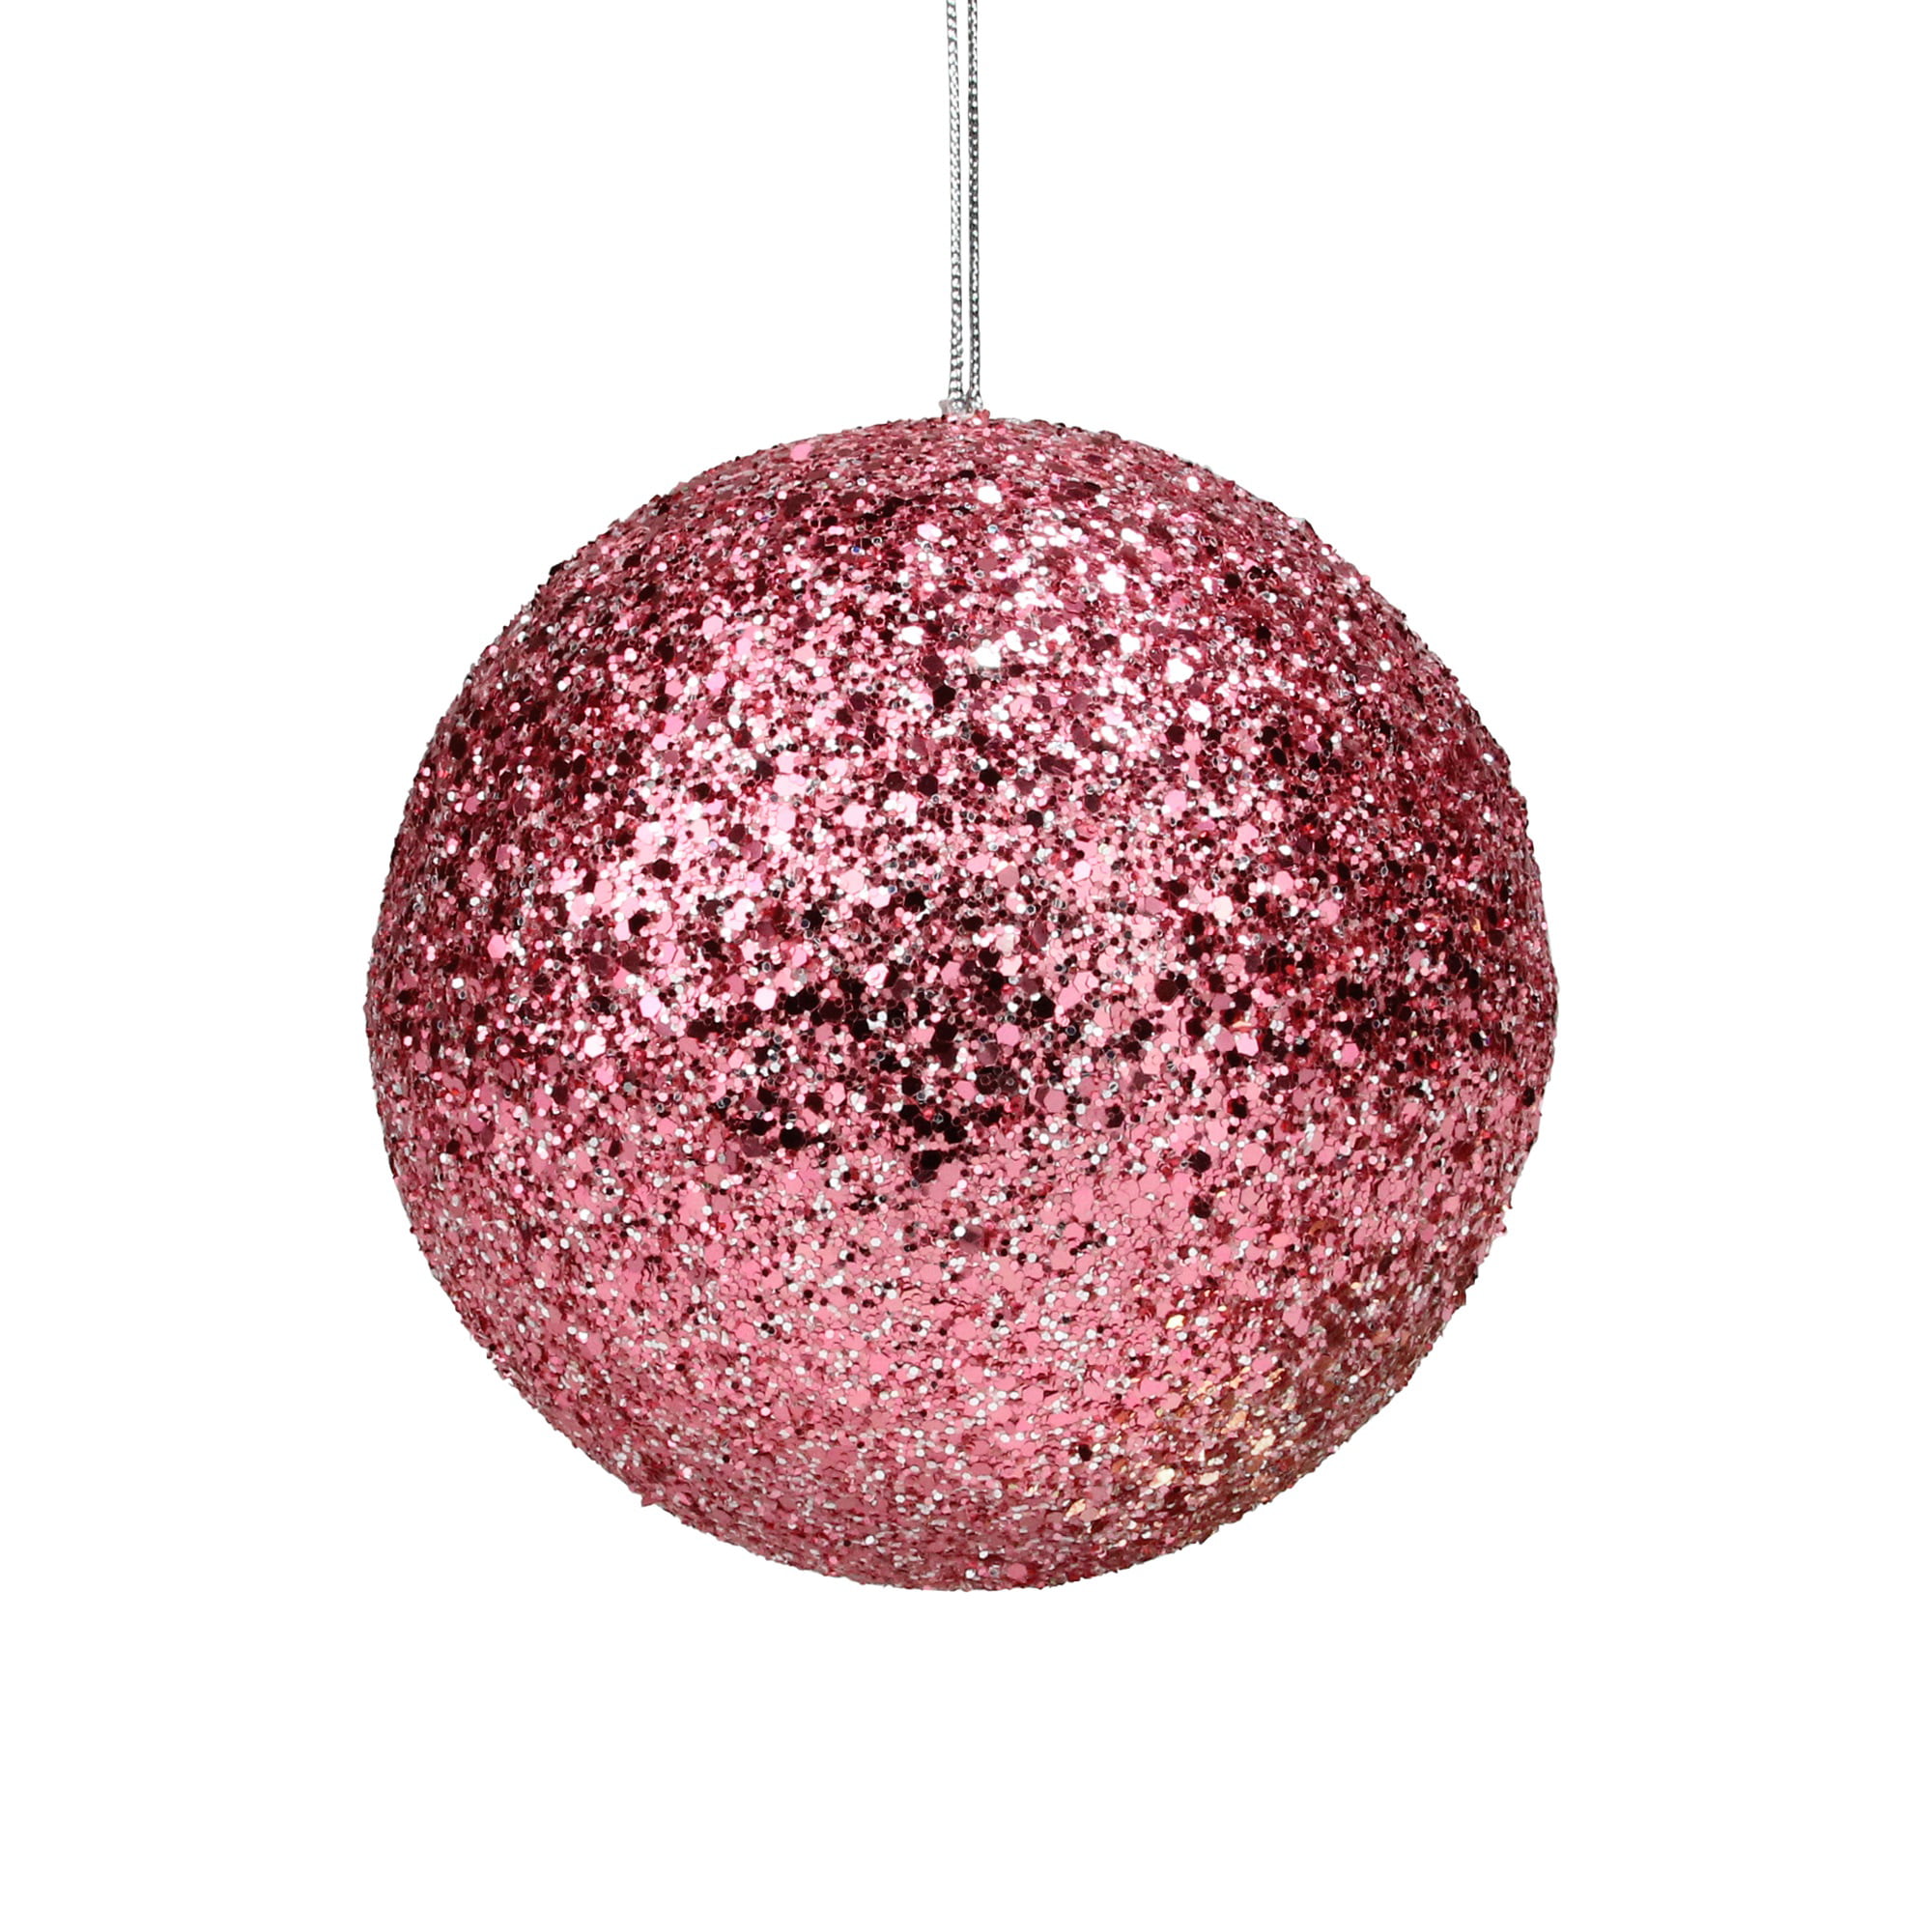 4 HOT PINK SEQUIN GLITTER DISC CHRISTMAS TREE ORNAMENTS DECORATION TREE 